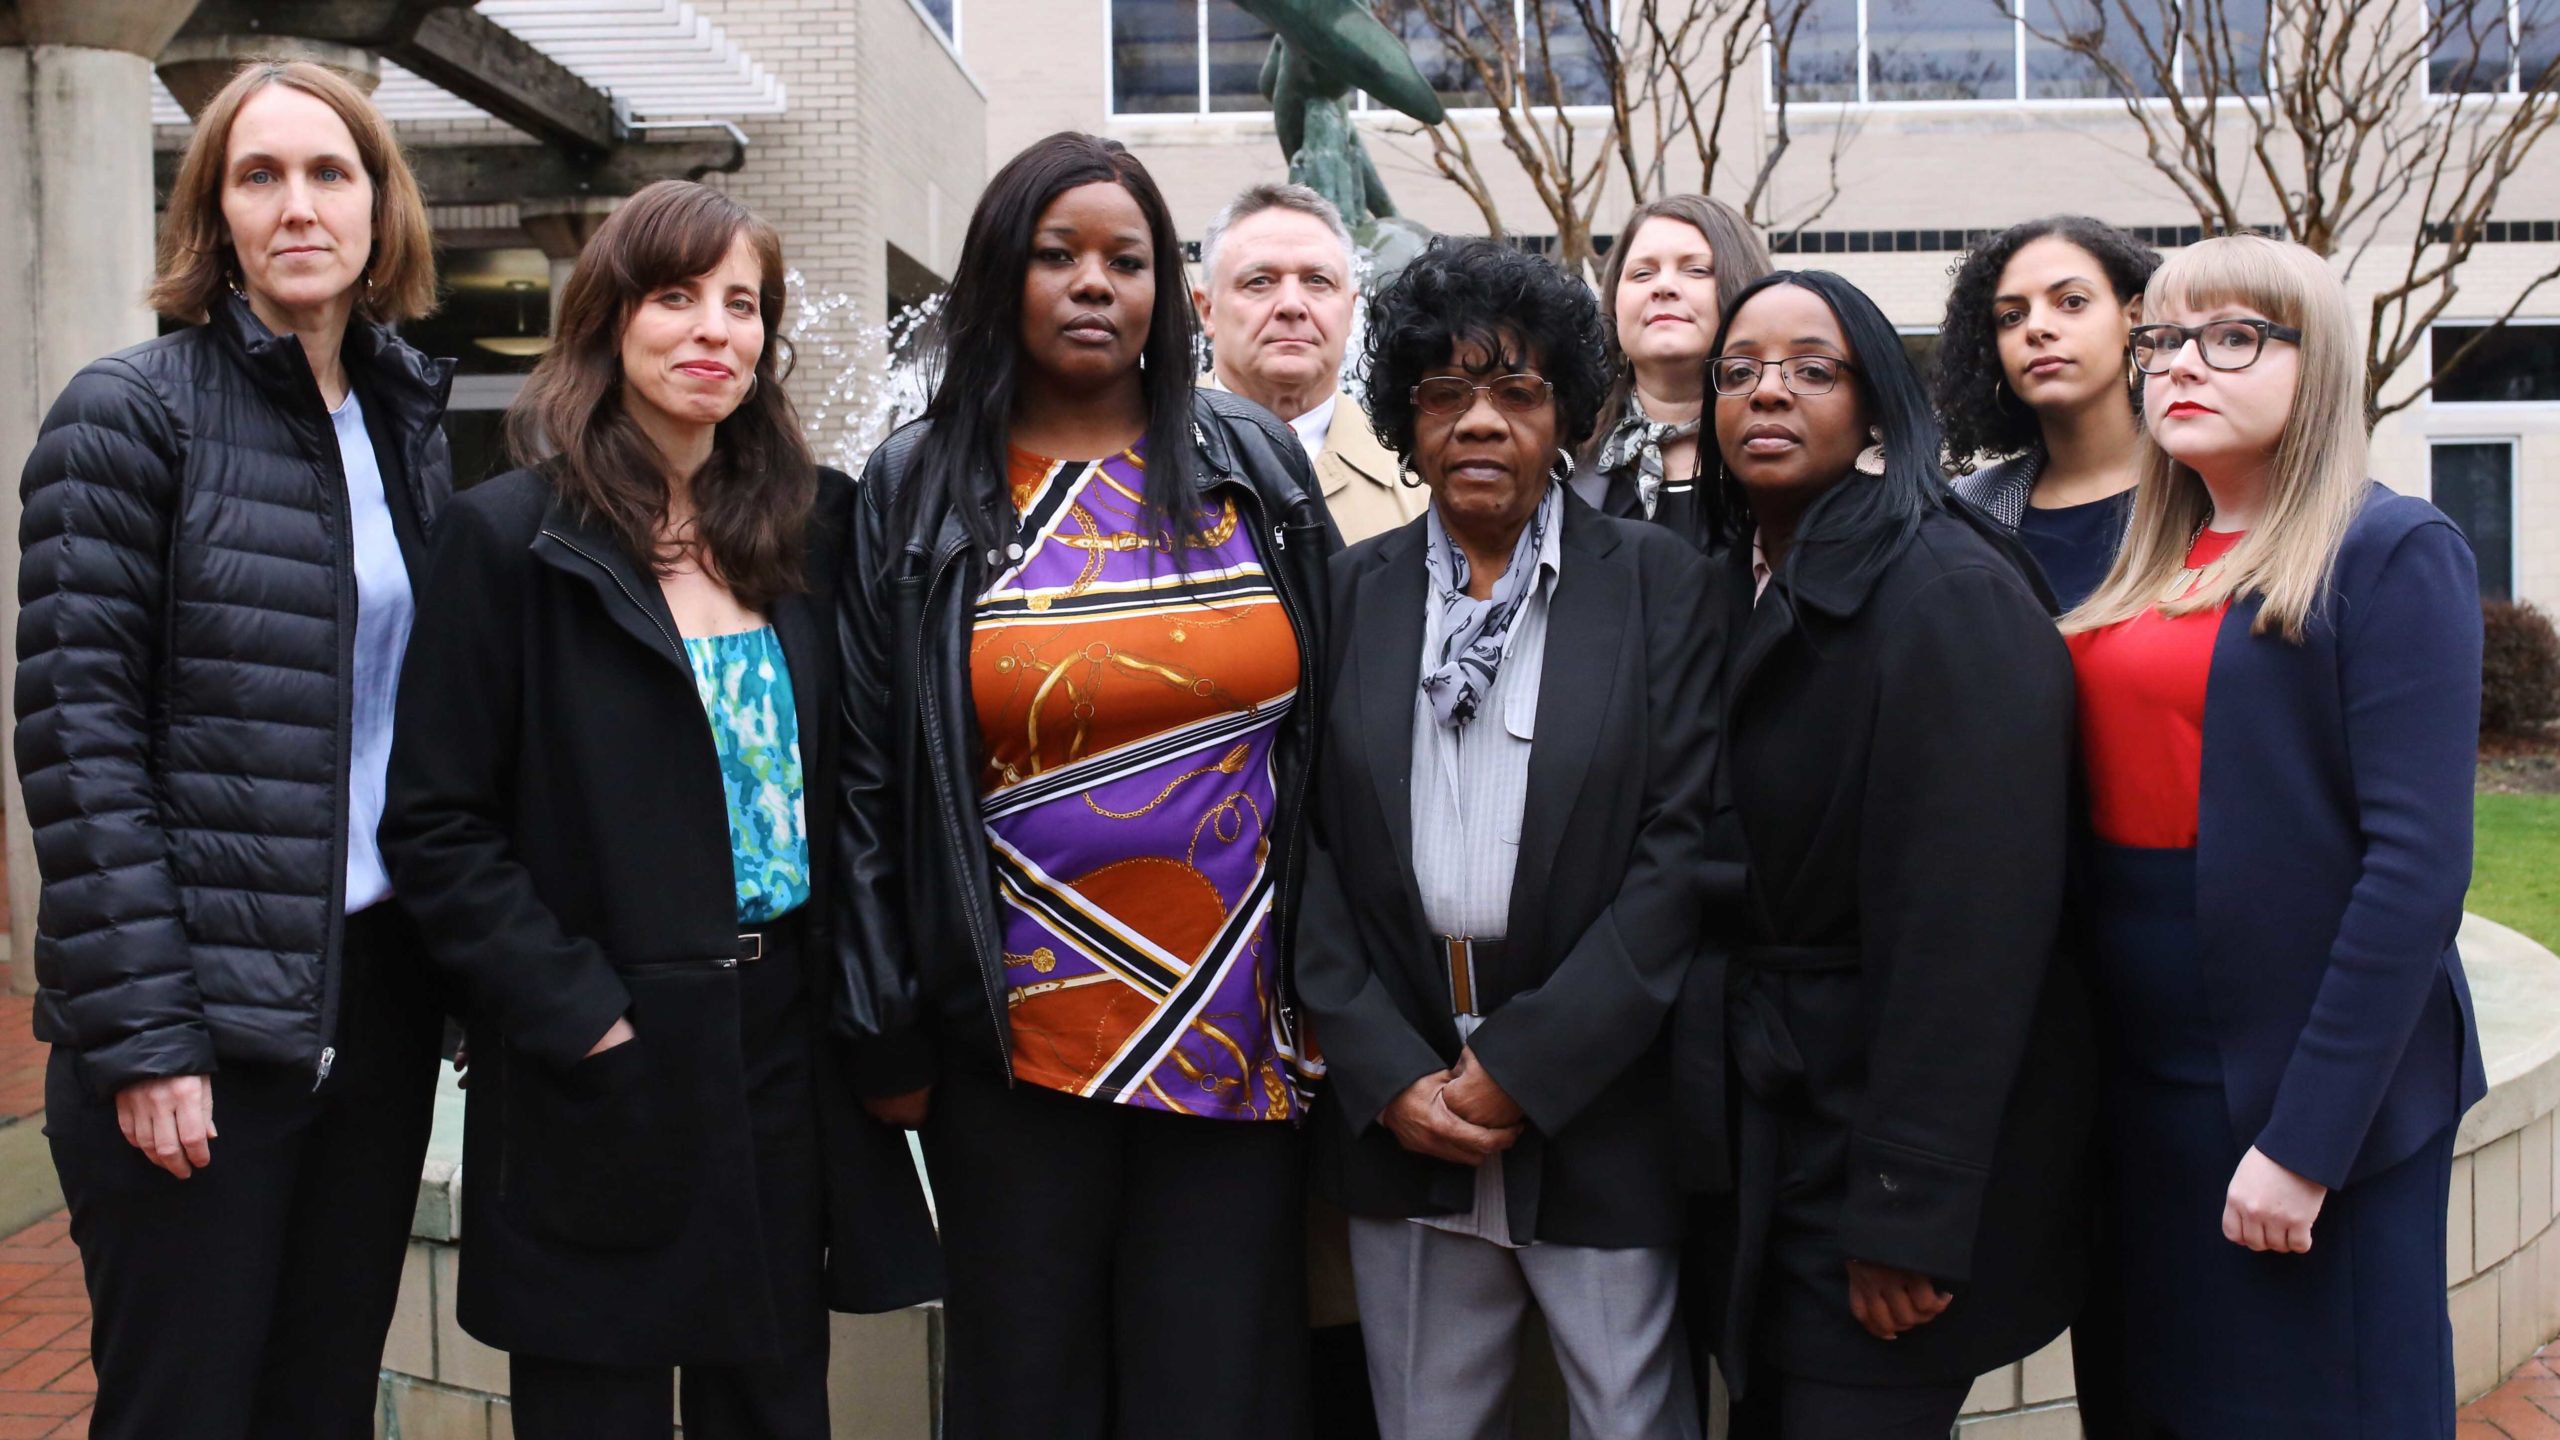 Members of Ledell Lee’s family and legal team, from left: John E. Tull (Quattlebaum, Grooms & Tull PLLC), Cassandra Stubbs (ACLU), Nina Morrison (Innocence Project), Shantel Young (sister of Ledell Lee), Stella Young (mother of Ledell Lee), Patricia Young (sister of Ledell Lee), Kaitlin Welborn (Hogan Lovells US LLP), Olivia Ensign (ACLU), and Hollly Dickson (ACLU of Arkansas), following the filing of a Freedom of Information Act lawsuit in state court on behalf of Patricia Young in Little Rock, Arkansas, on Jan. 23, 2020. [Matt White/Innocence Project]